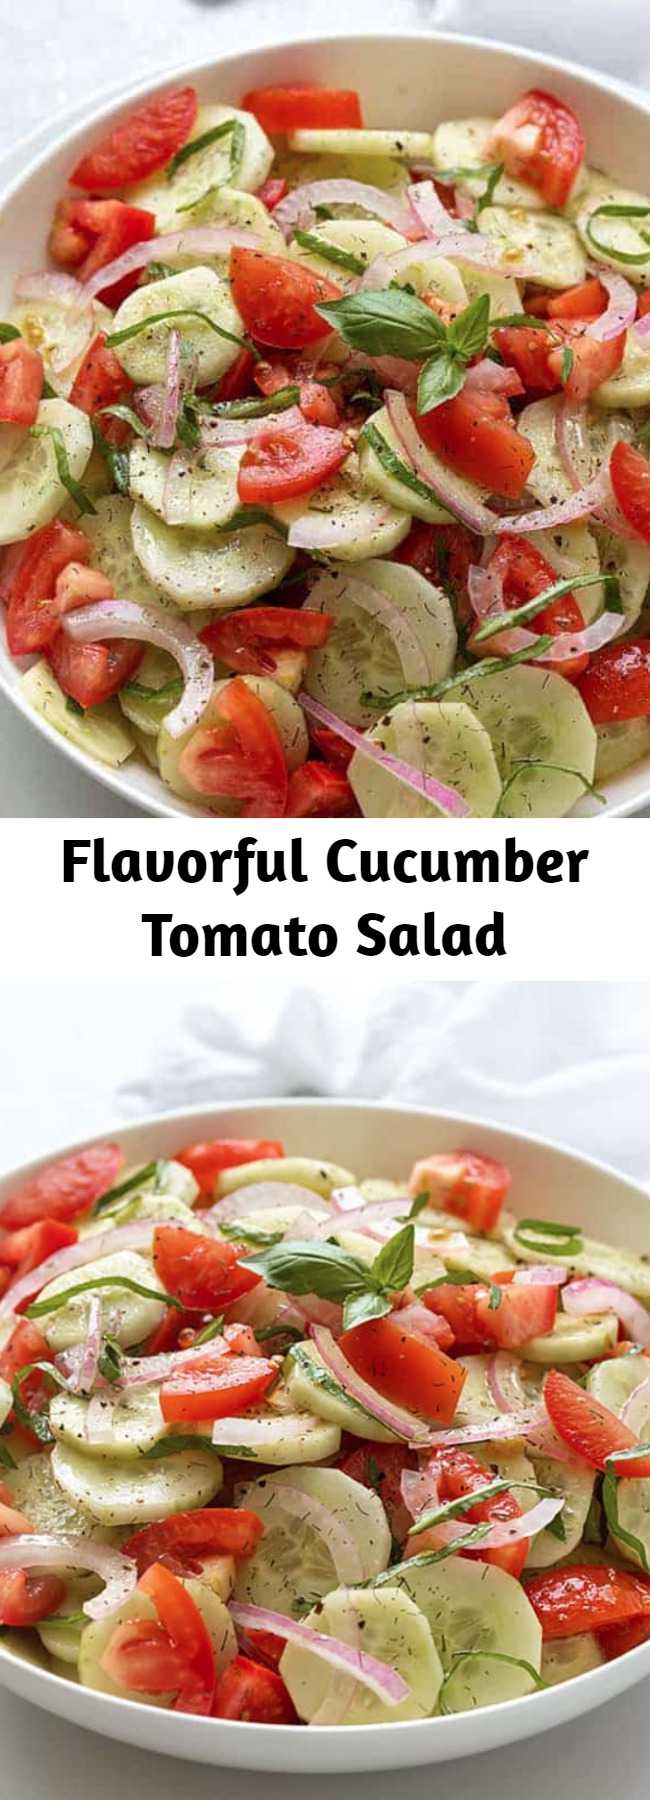 Flavorful Cucumber Tomato Salad - This Cucumber Tomato Salad seasoned with dill and fresh basil in a homemade vinaigrette is an easy, healthy and flavorful side salad!